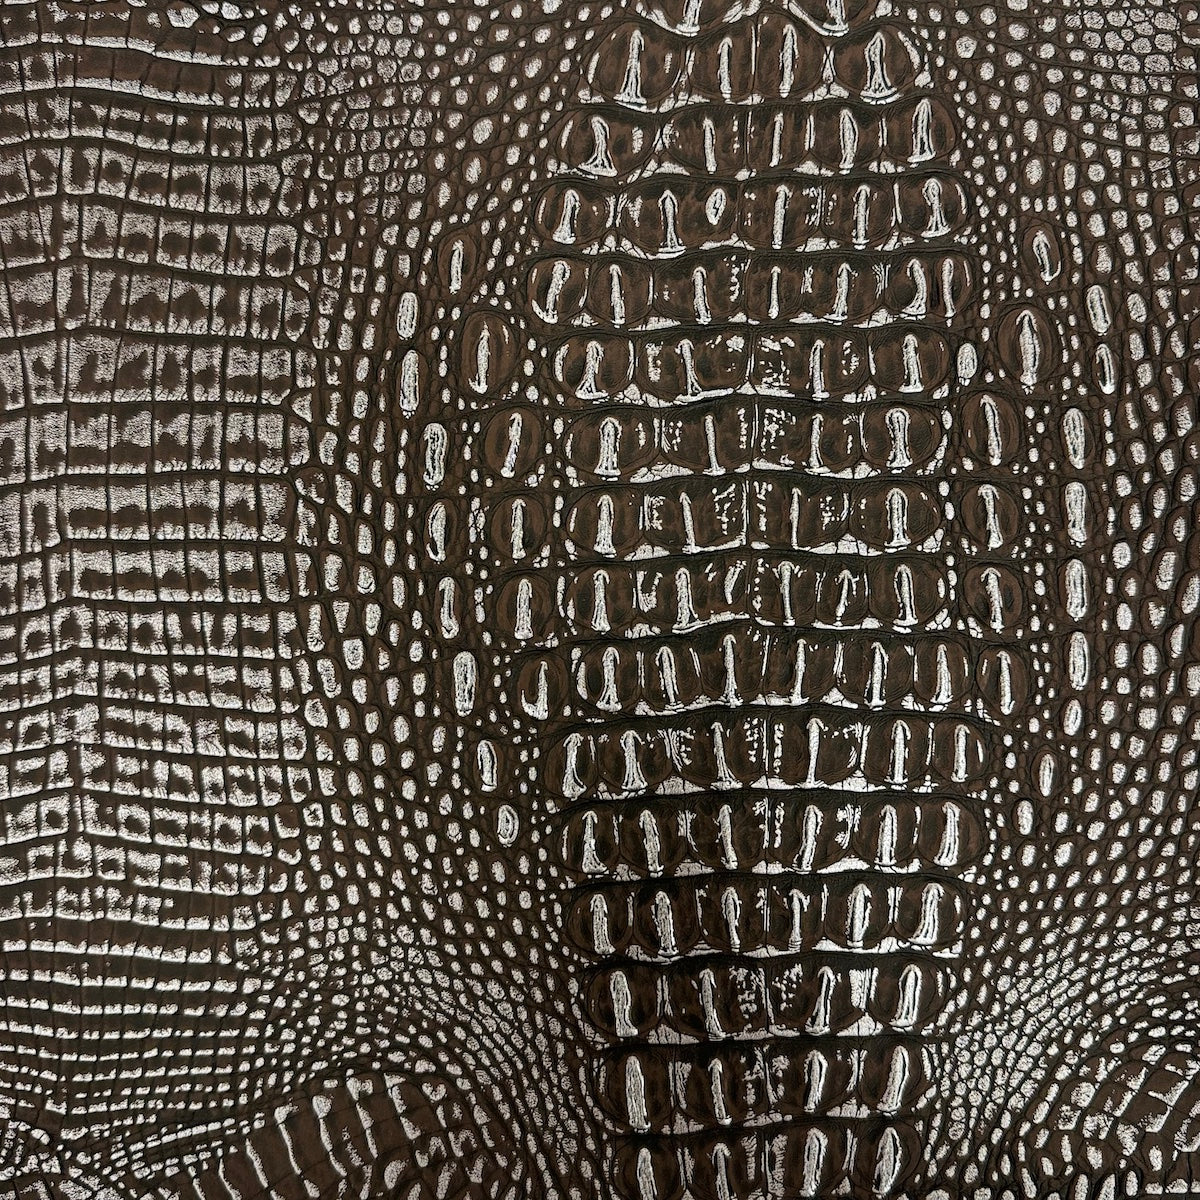 Brown | Silver Mugger Two Tone Gator Faux Leather Vinyl Fabric